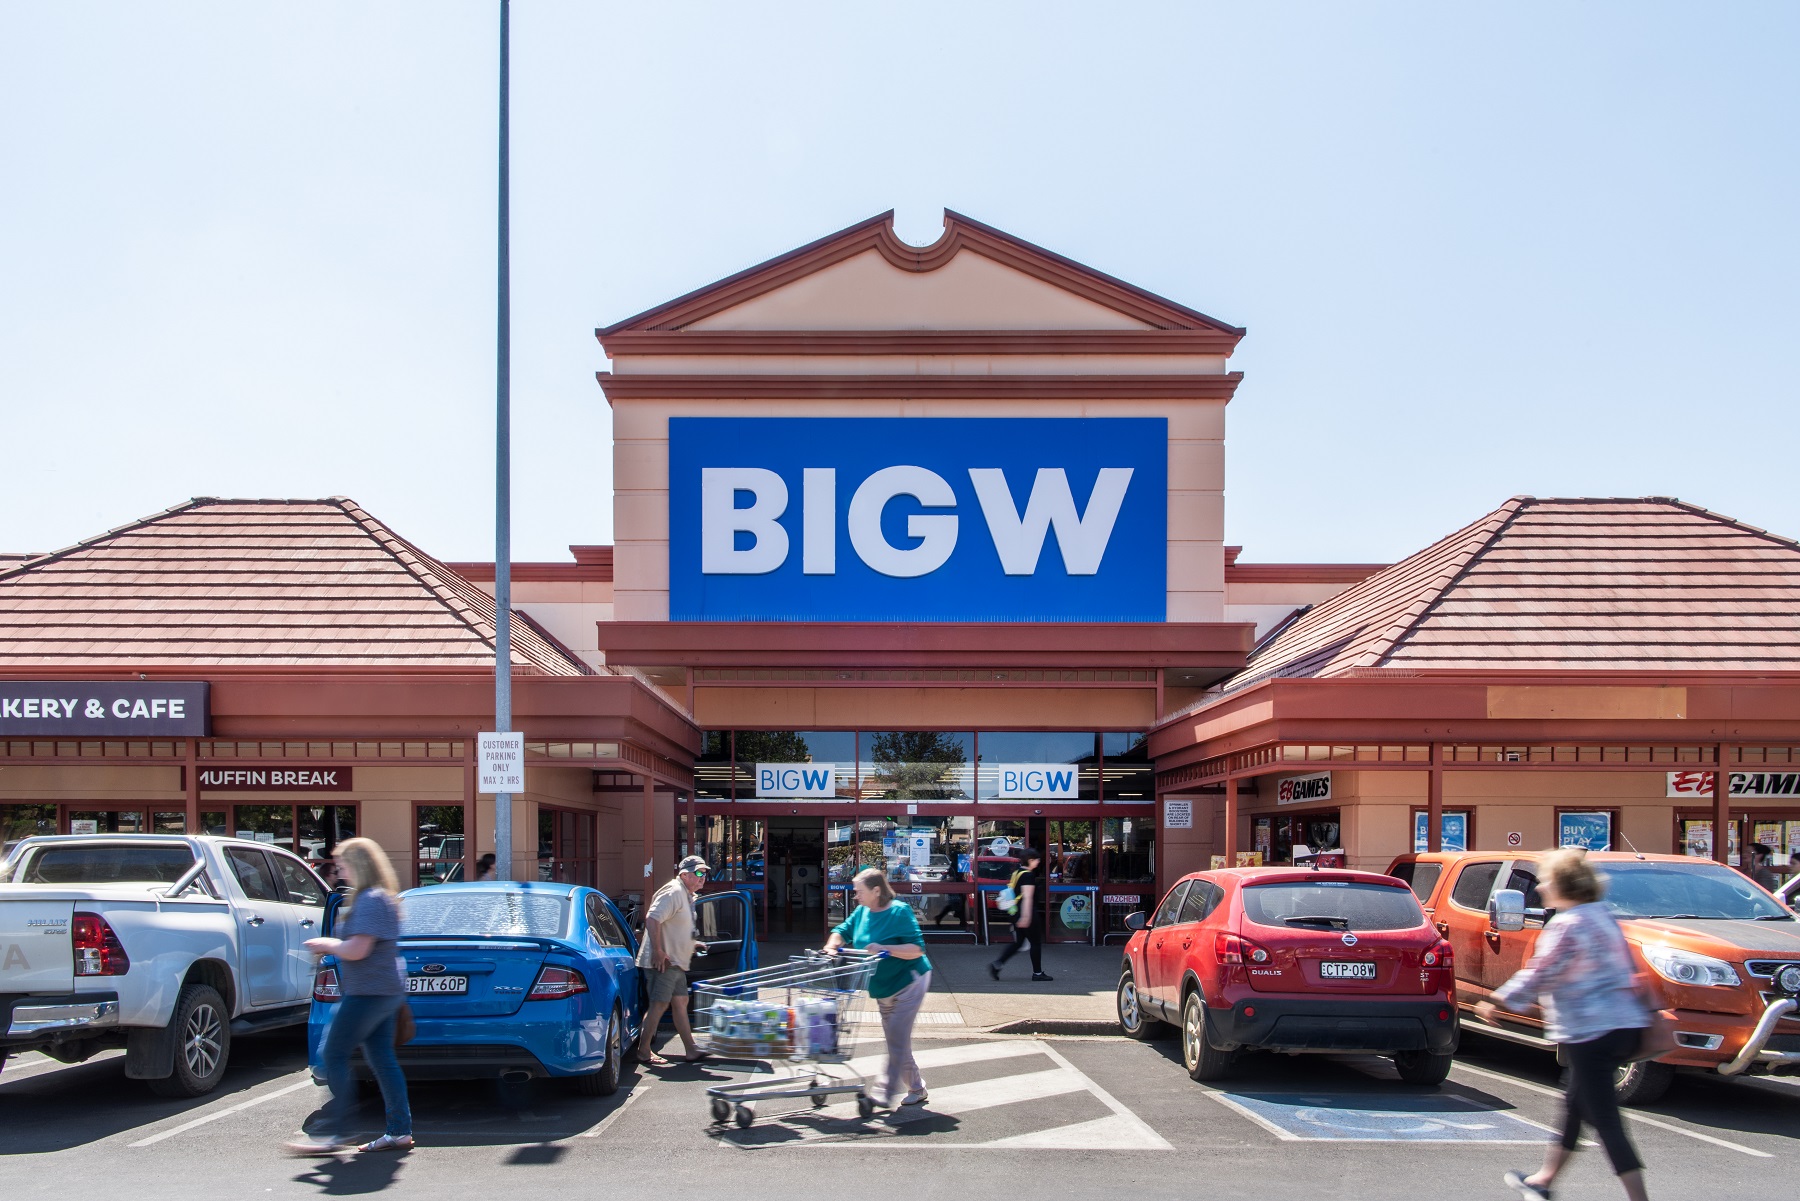 Big W Mudgee hits the market offered by Colliers - retailbiz